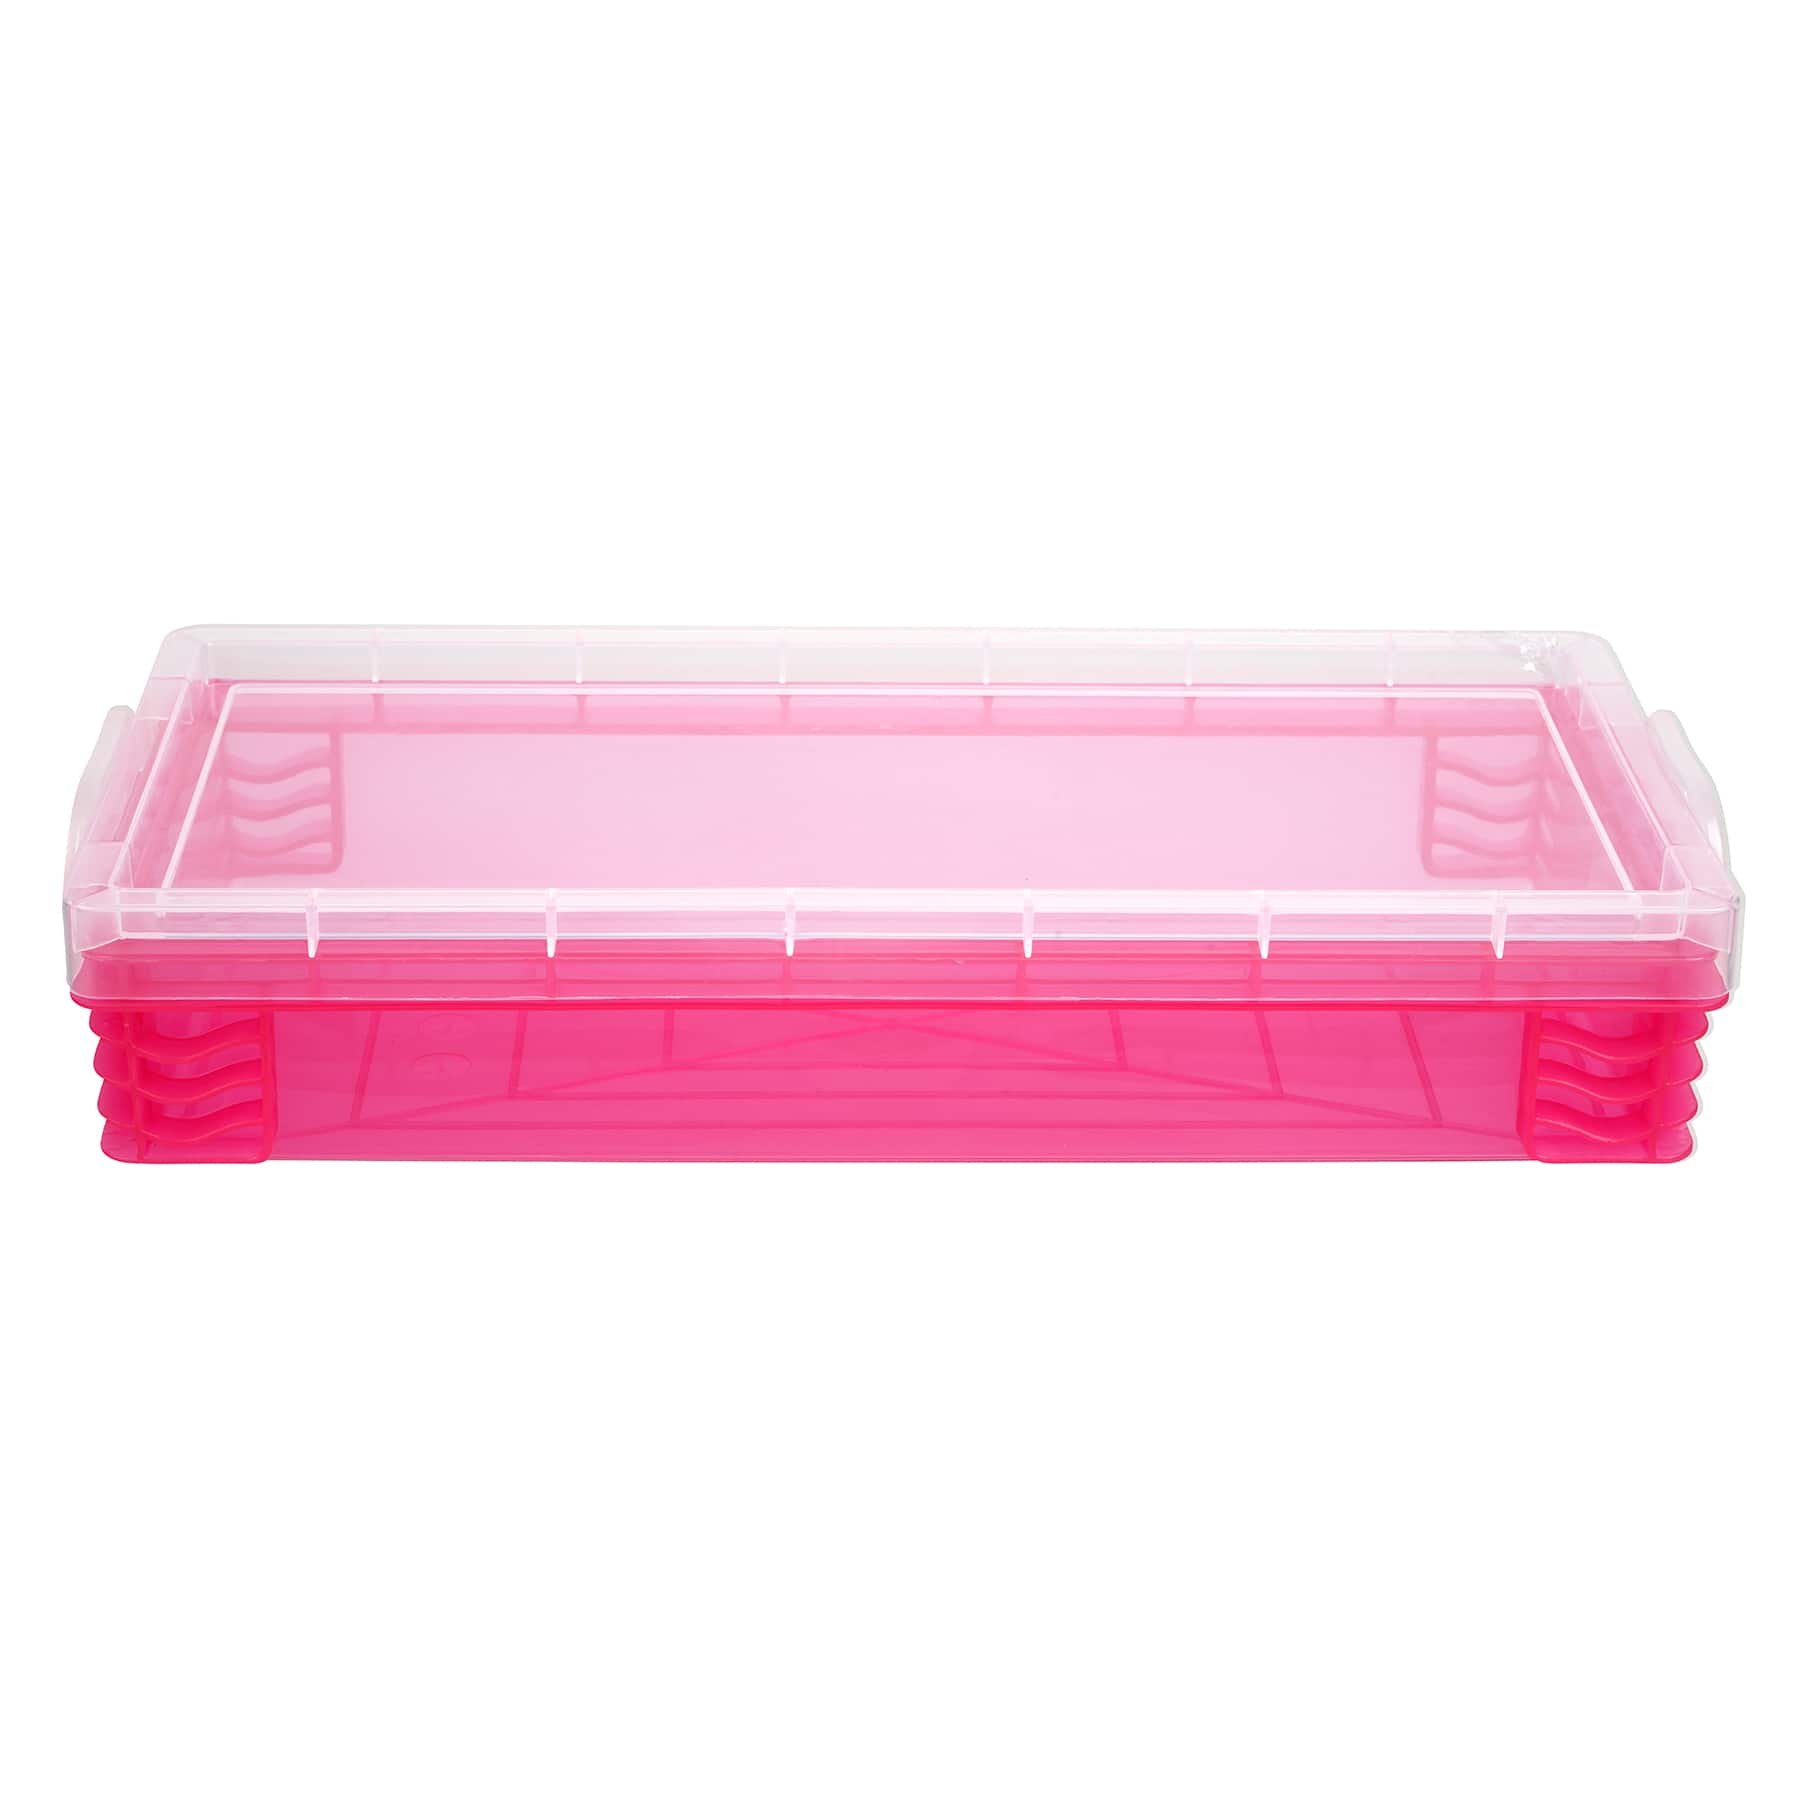 12 Pack: Stacking Pencil Box by Simply Tidy™